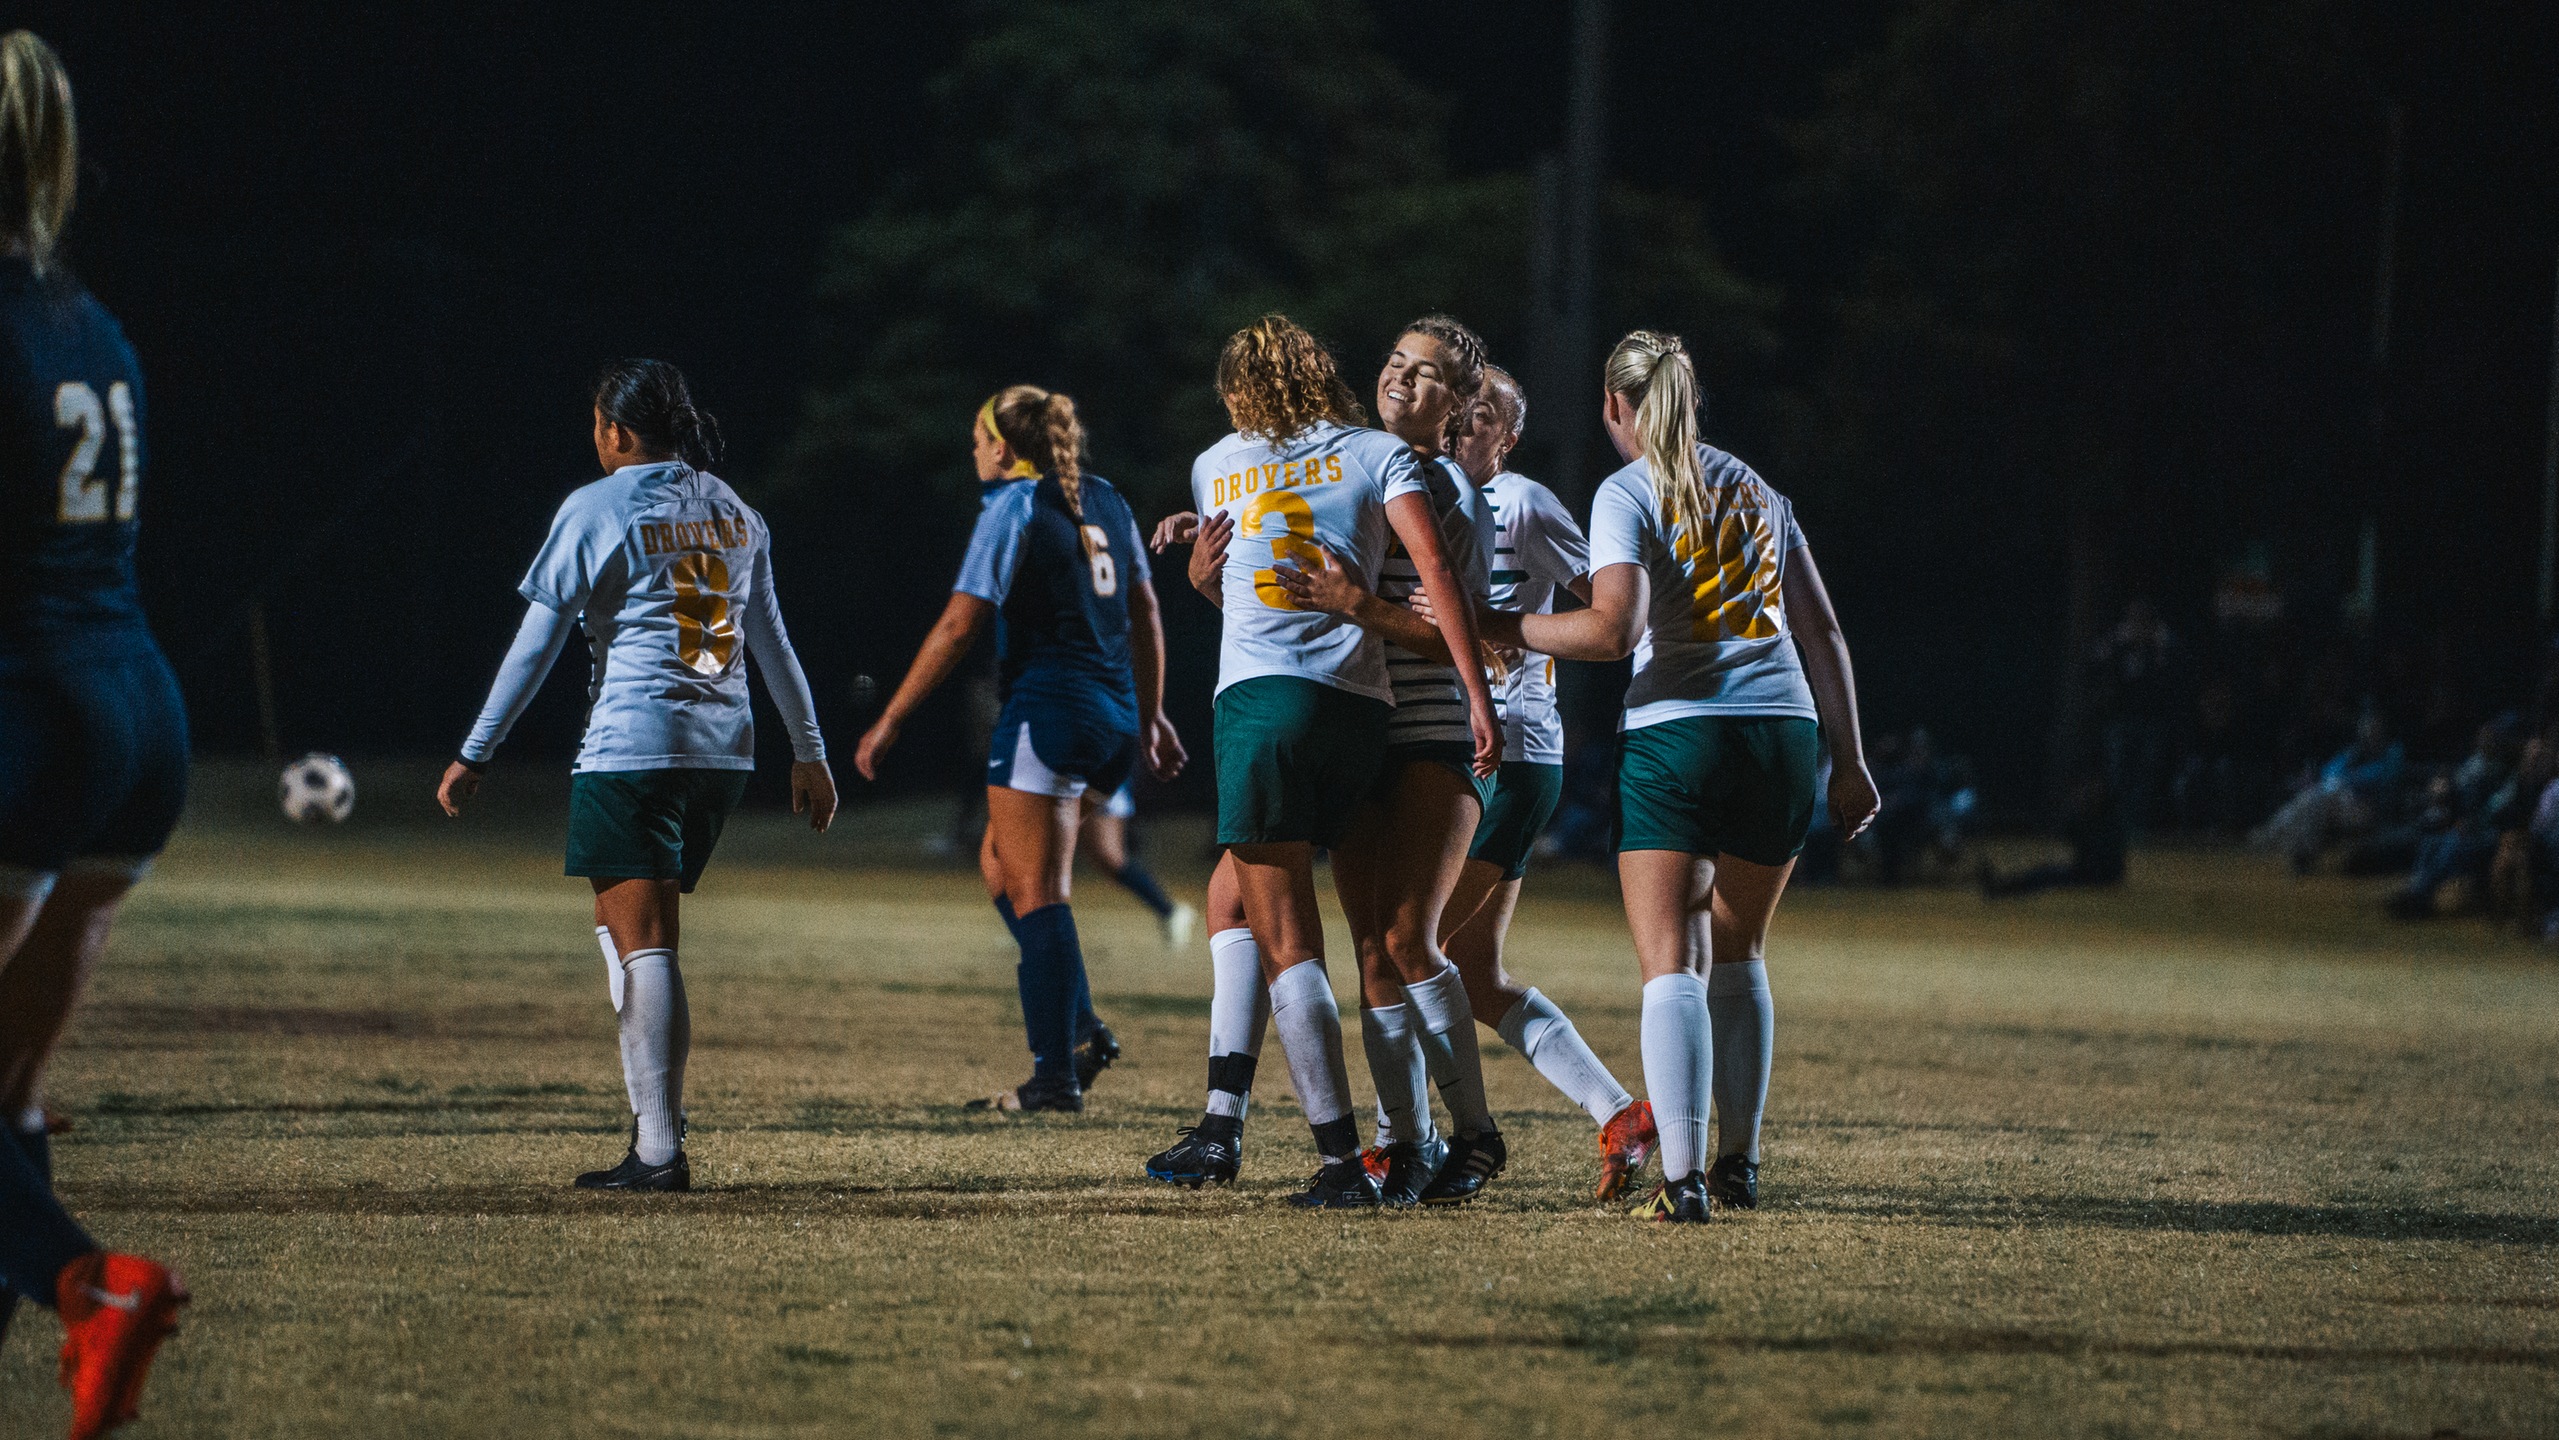 drovers celebrate after ilse de jong scores her 2nd goal of the game vs texas wesleyan.